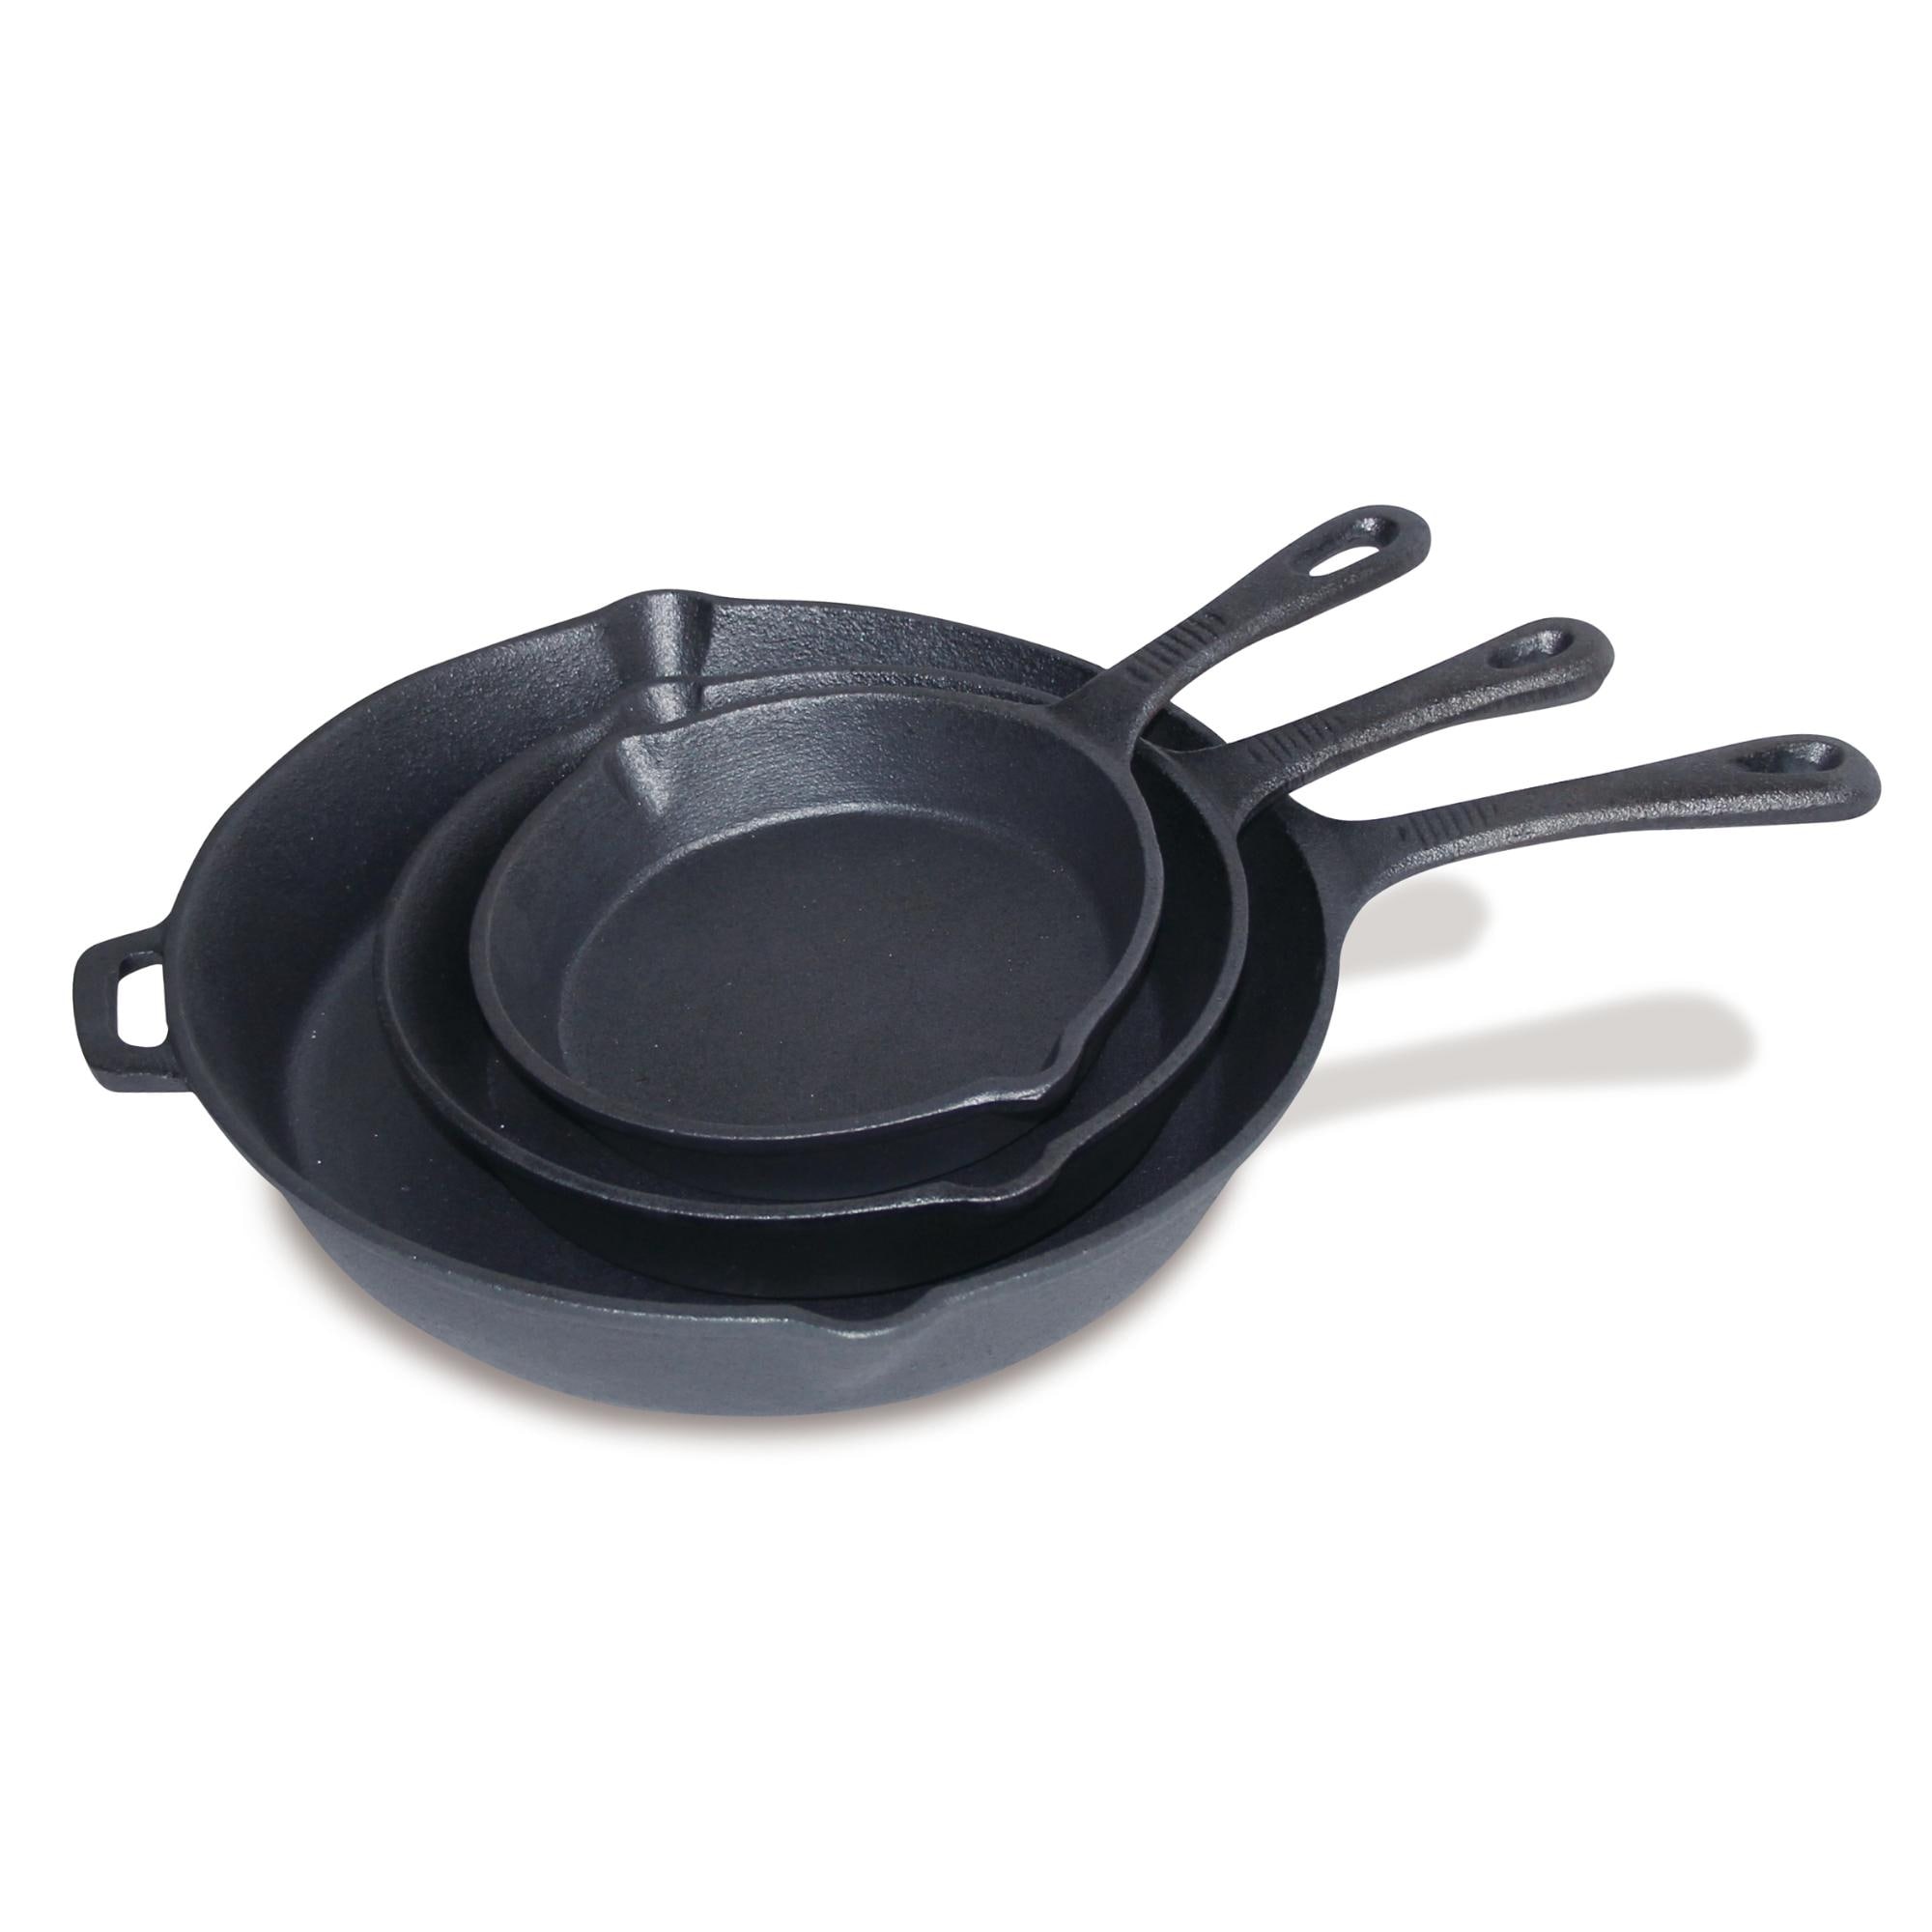 https://ak1.ostkcdn.com/images/products/is/images/direct/6770a7cf3343b5da248b229ac160cc637b0bbb8e/ChefVentions-3-pc-Cast-Iron-Skillet-Set---6%22%2C-8%22%2C-and-10%22.jpg